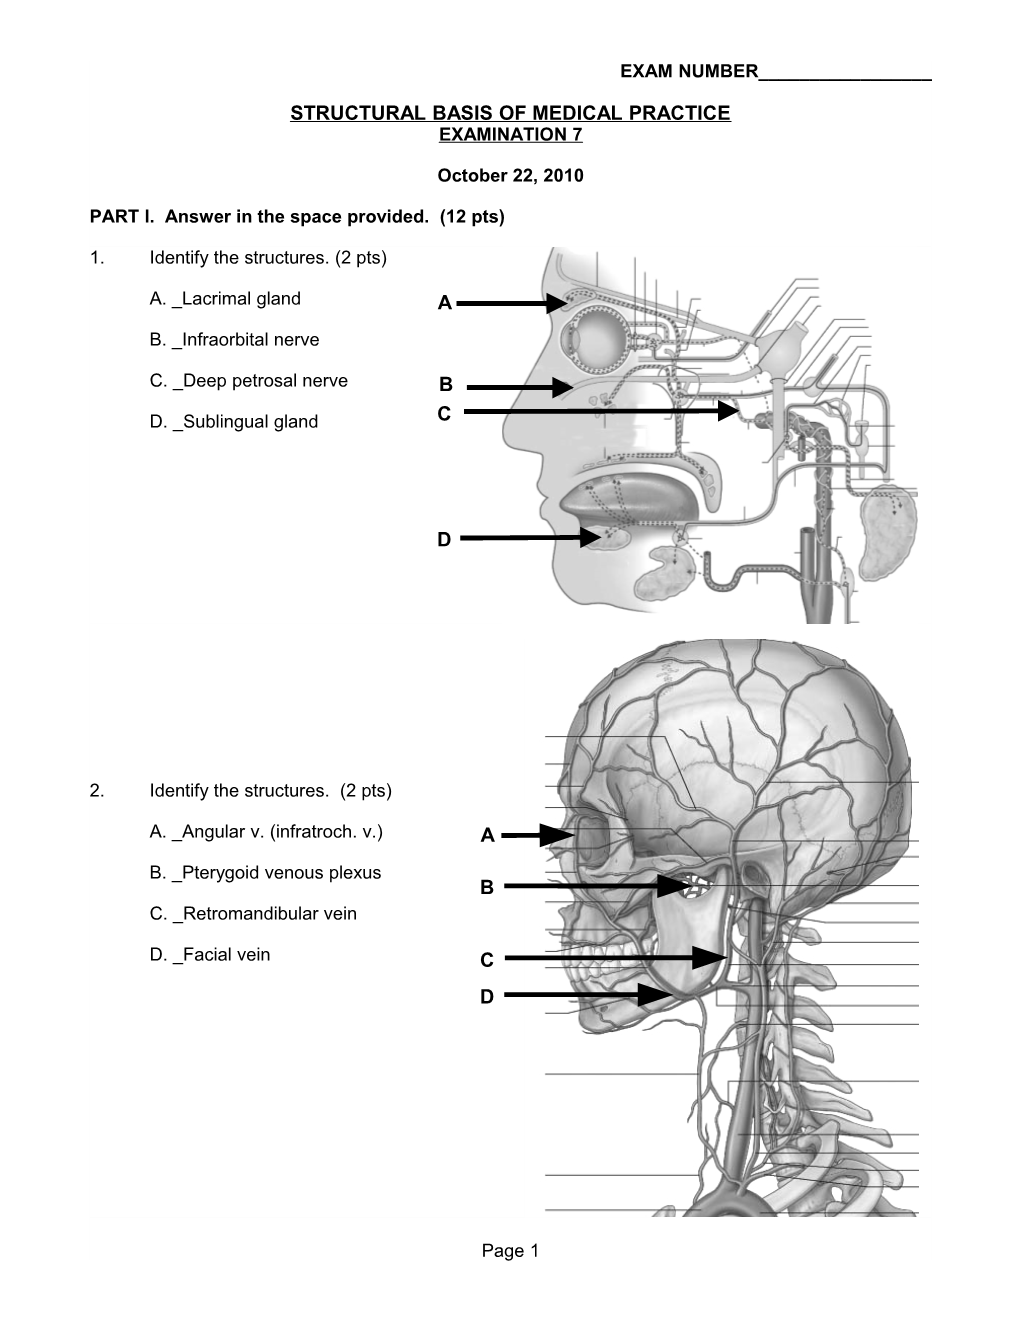 Structural Basis of Medical Practice C D a B a B